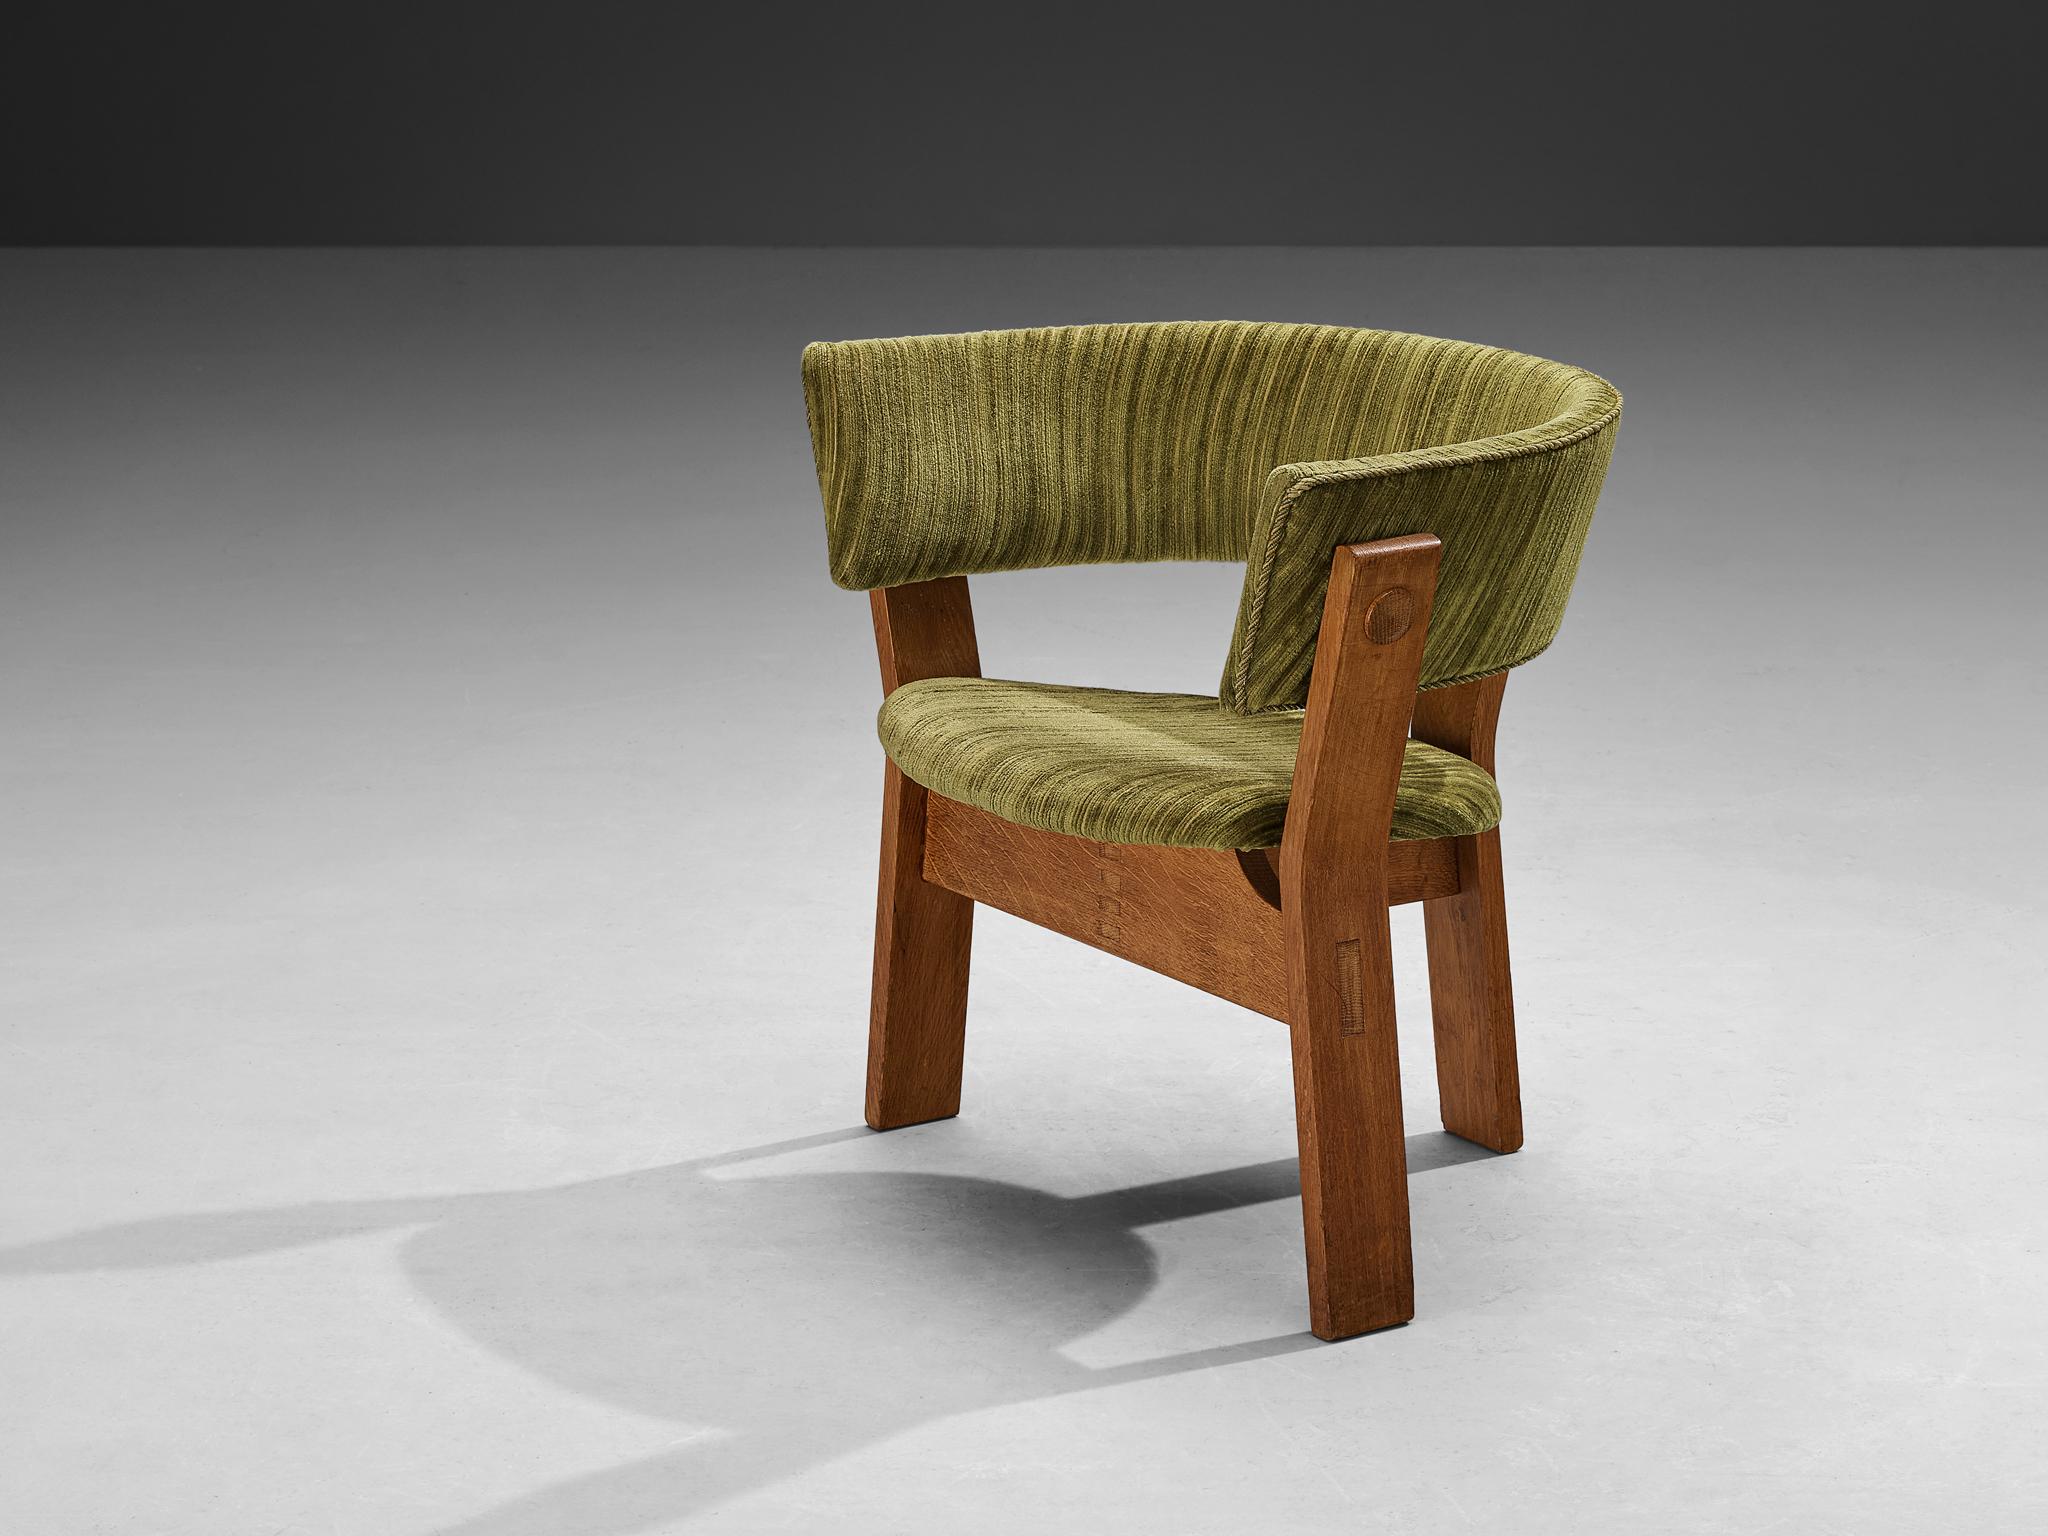 Steen Østergaard for Stol-Ex, lounge chair, oak, fabric, Denmark, 1962

Made in 1962, this armchair bears the mark of Danish architect and industrial designer, Steen Østergaard, crafted explicitly for the TV house in Copenhagen. Exhibiting graceful